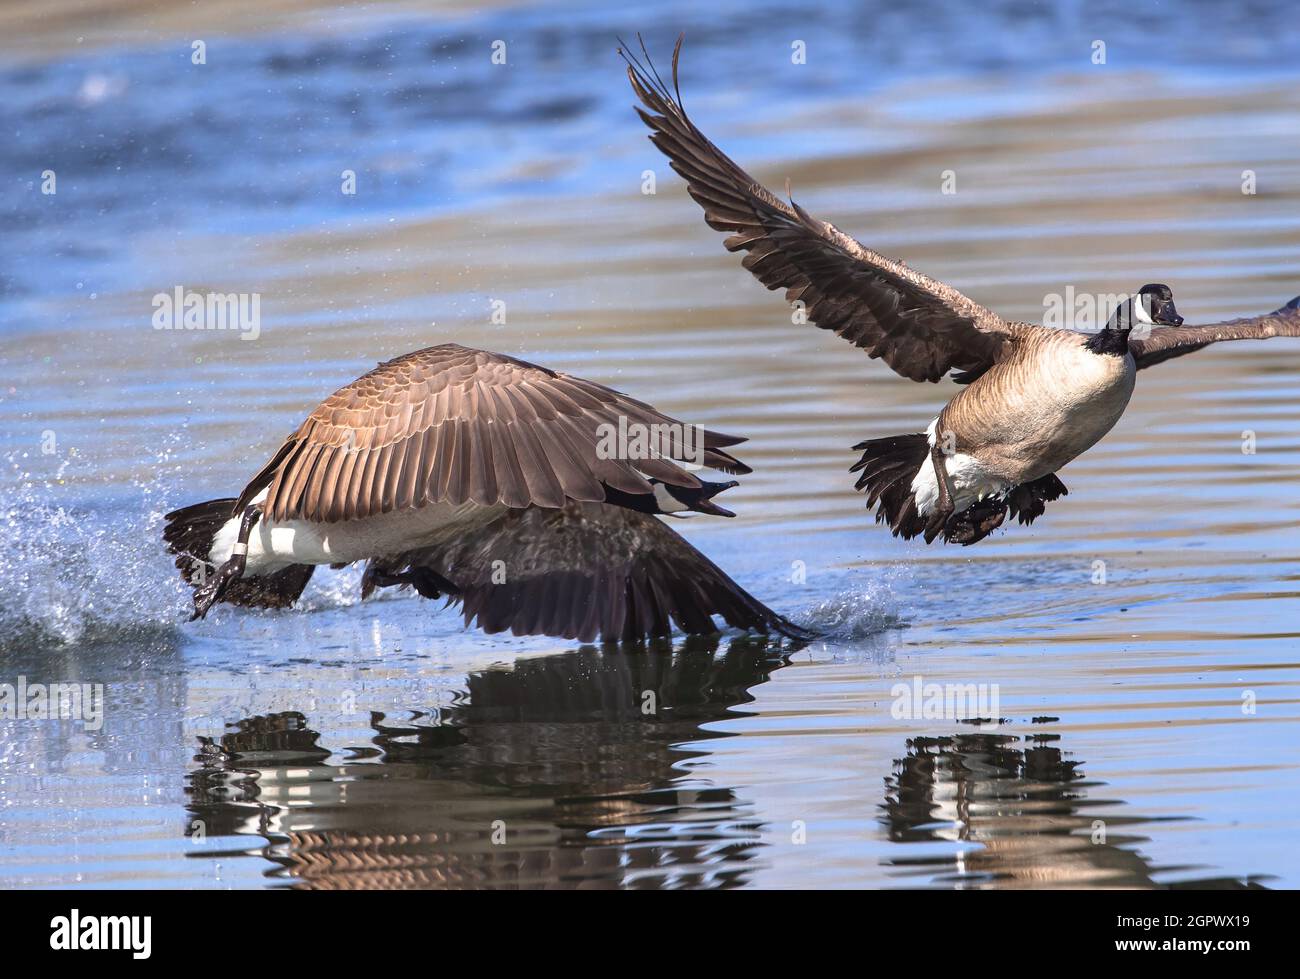 An aggressive Canadian Goose won't give up its chase of another goose after having chased it ashore. Stock Photo